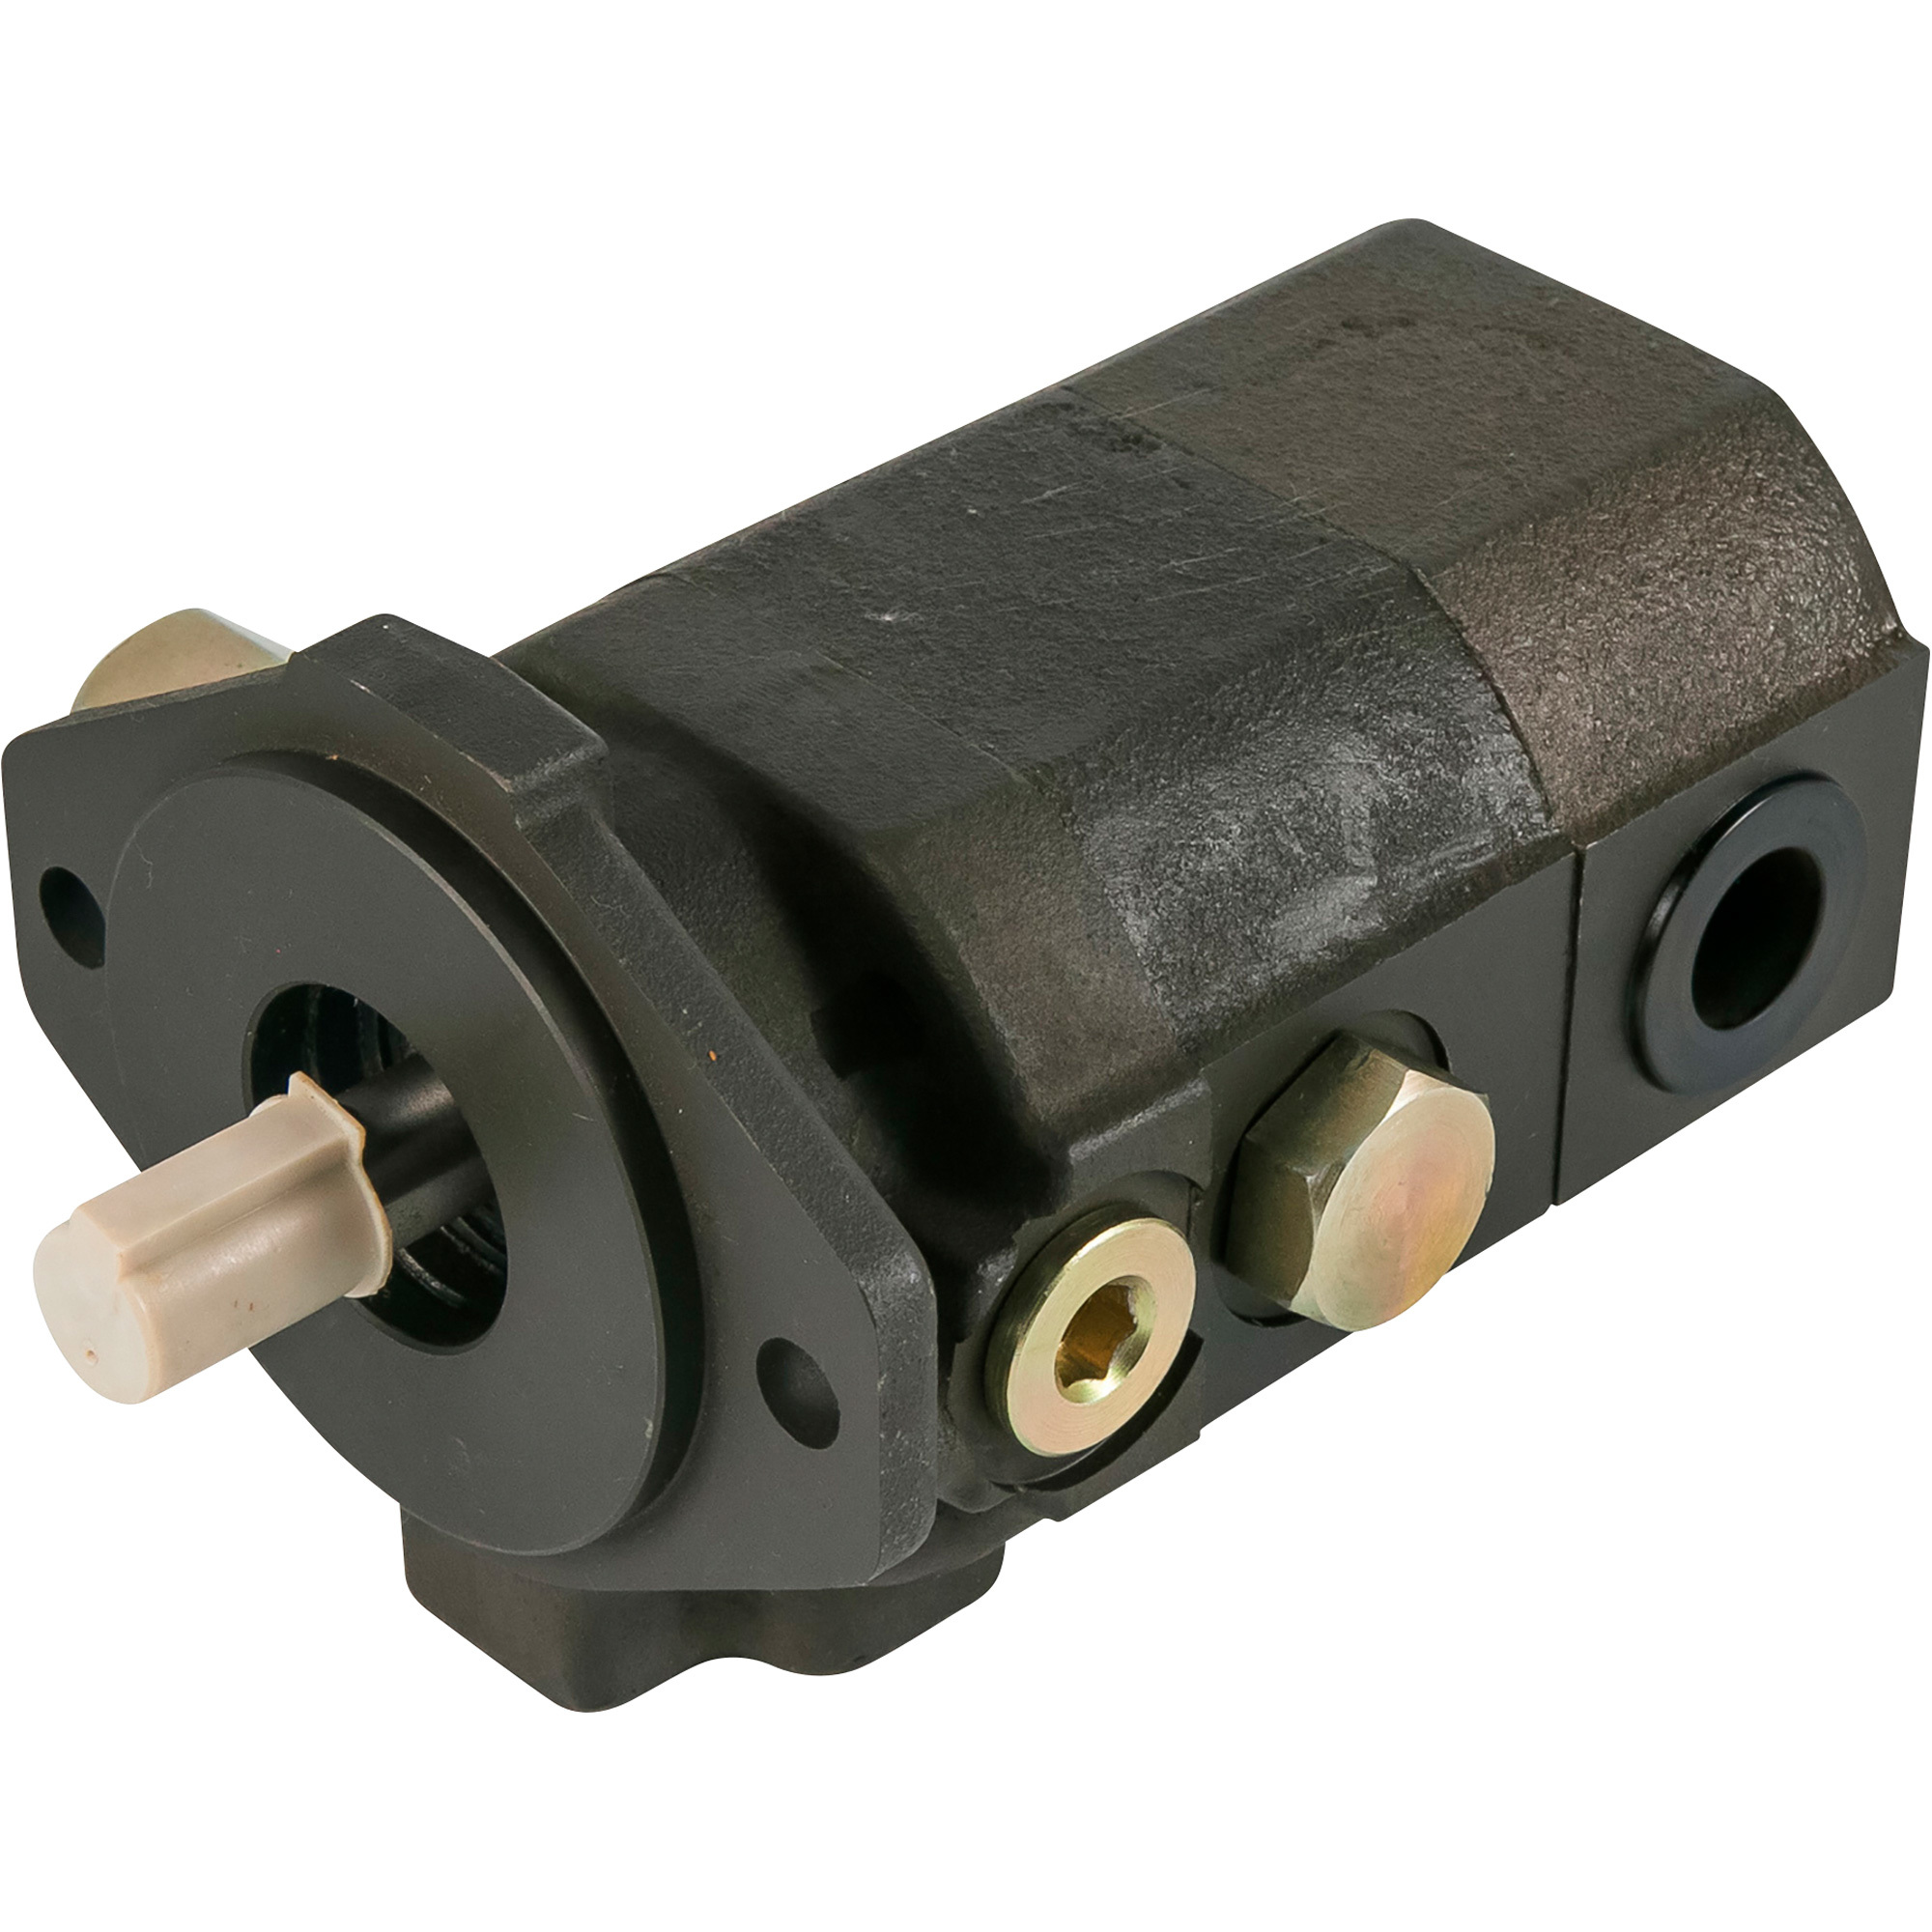 NorTrac Cast Iron Two-Stage High/Low Gear Pump â 28 GPM, 5/8Inch Diameter Shaft, Model CBT-22.9/7.6